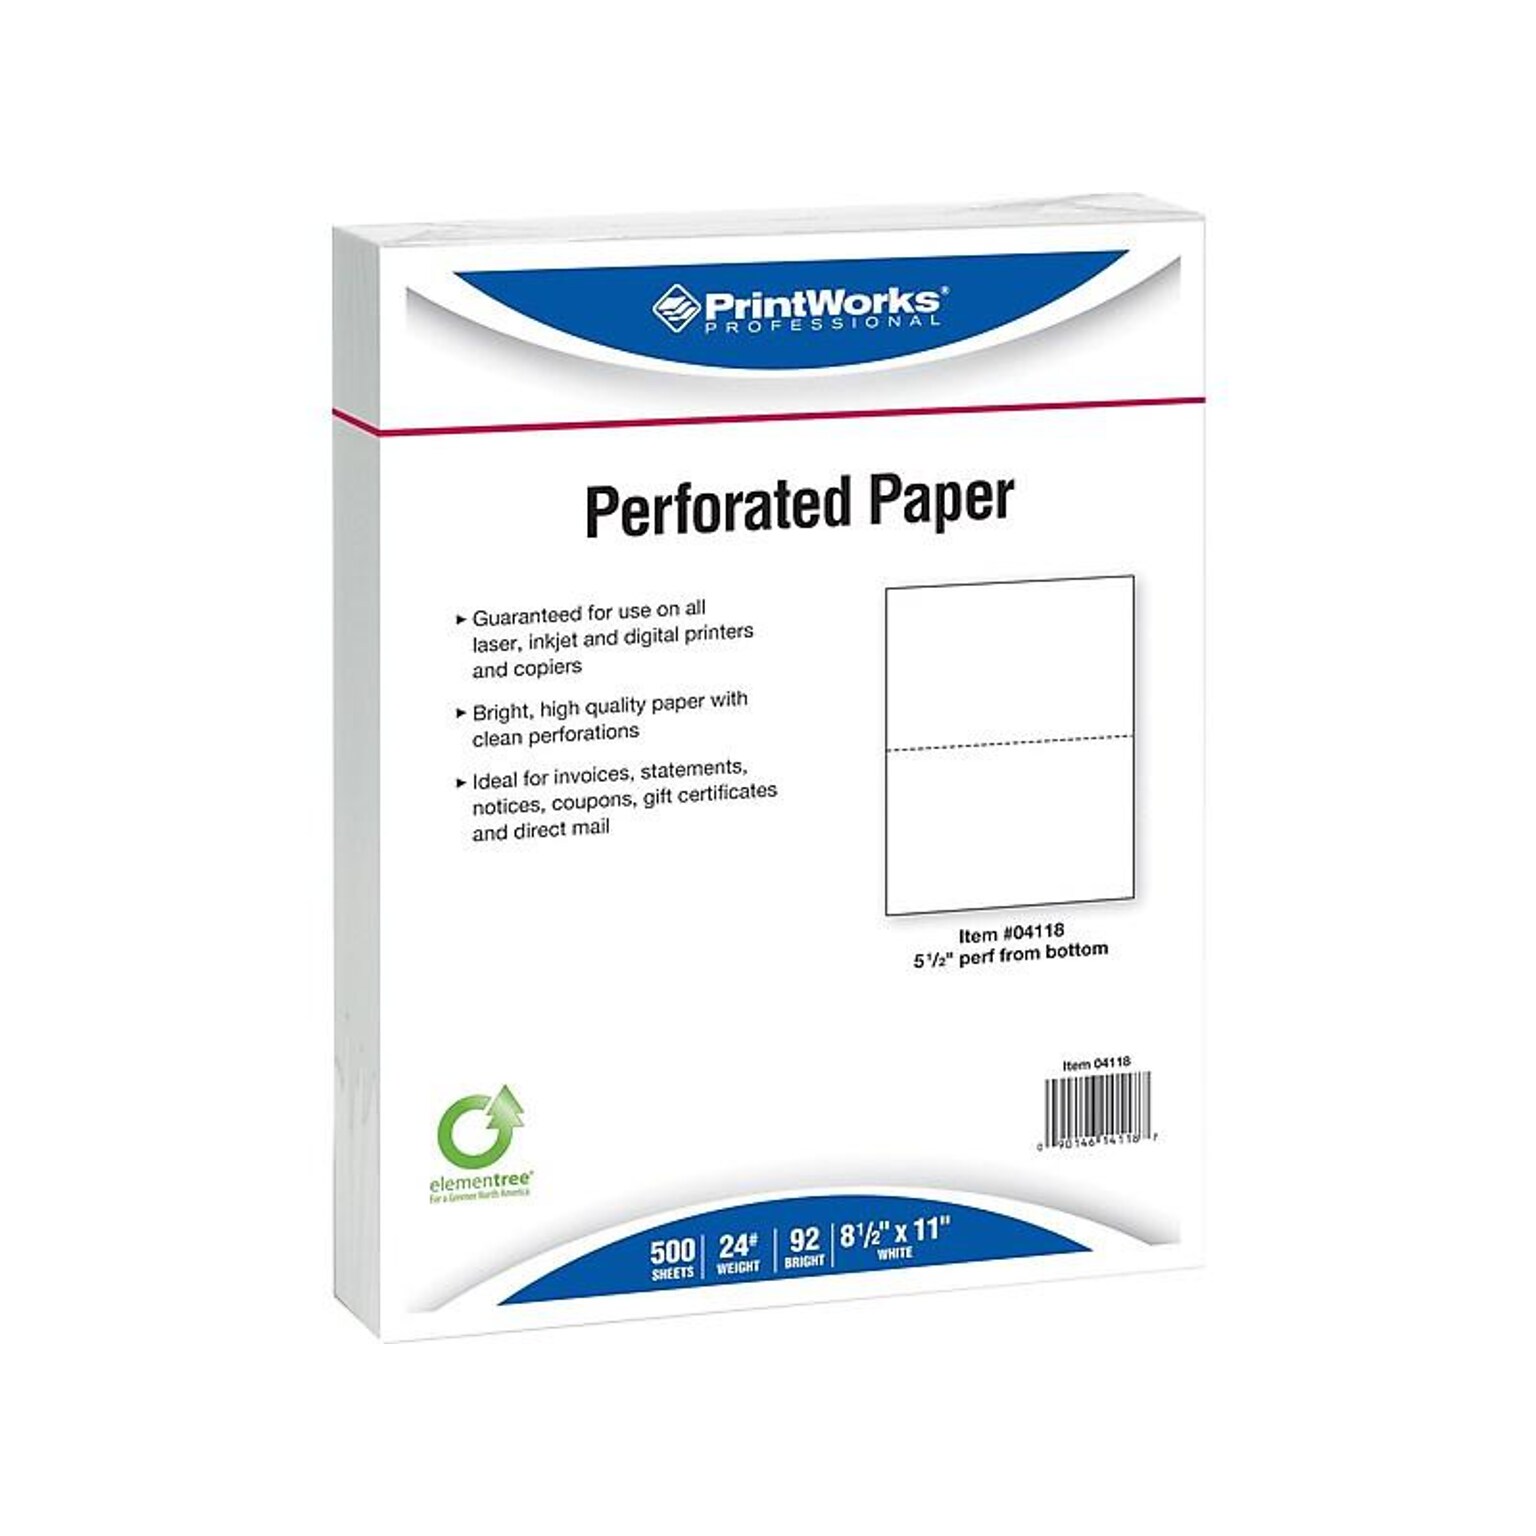 Printworks® Professional 8.5 x 11 Perforated Paper, 24 lbs., 92 Brightness, 2500 Sheets/Carton (04118P)